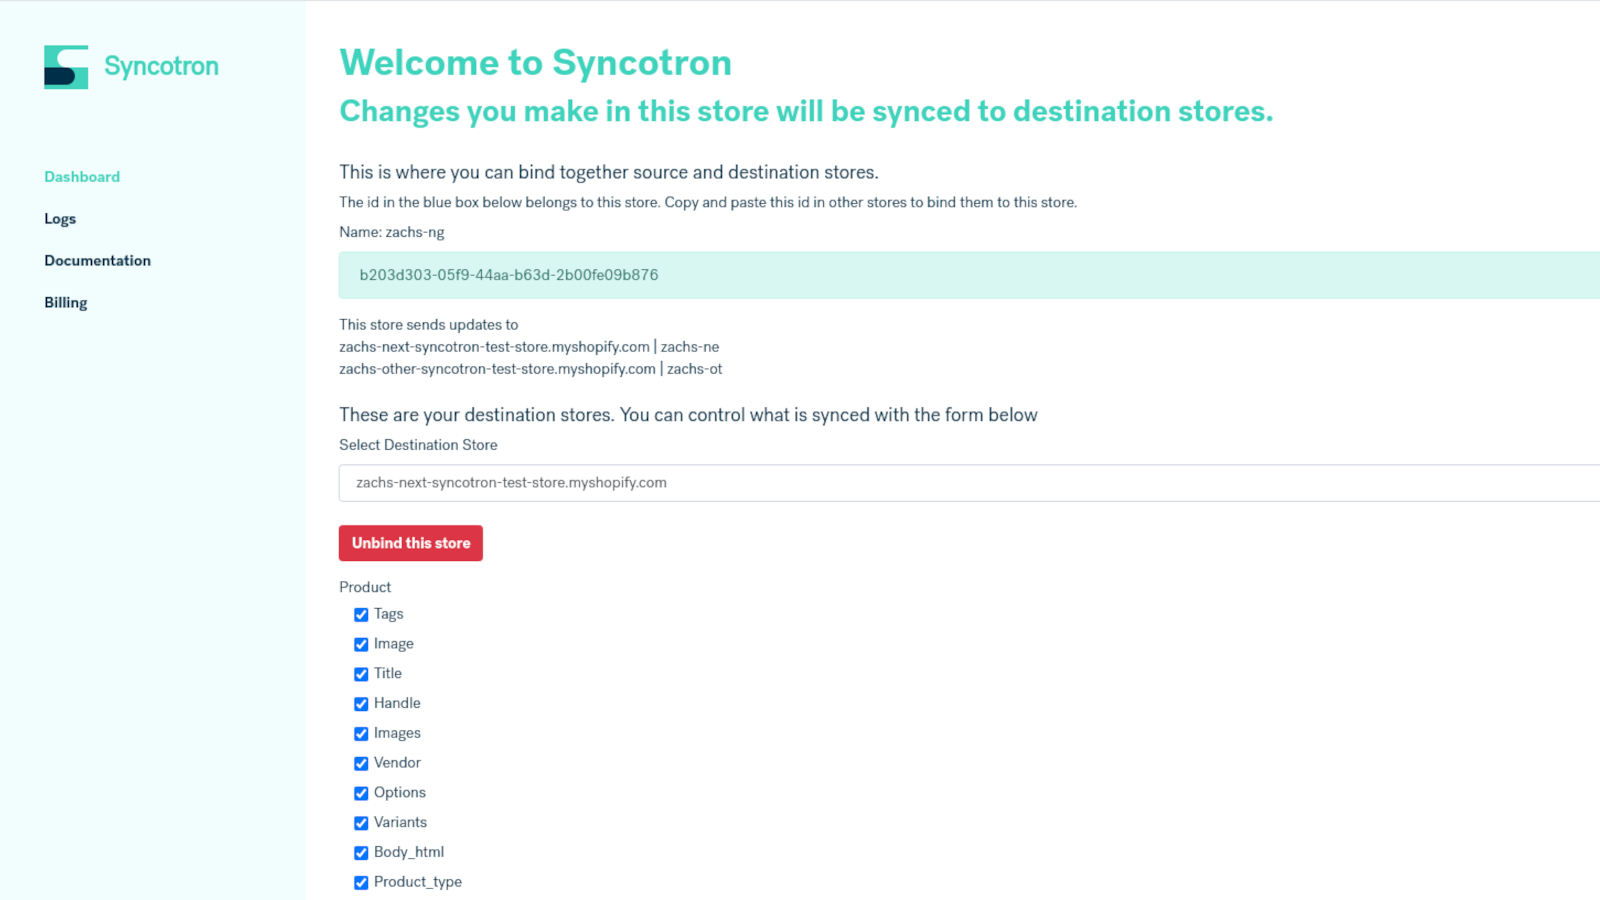 Welcome to Syncotron - granular control over your syncing